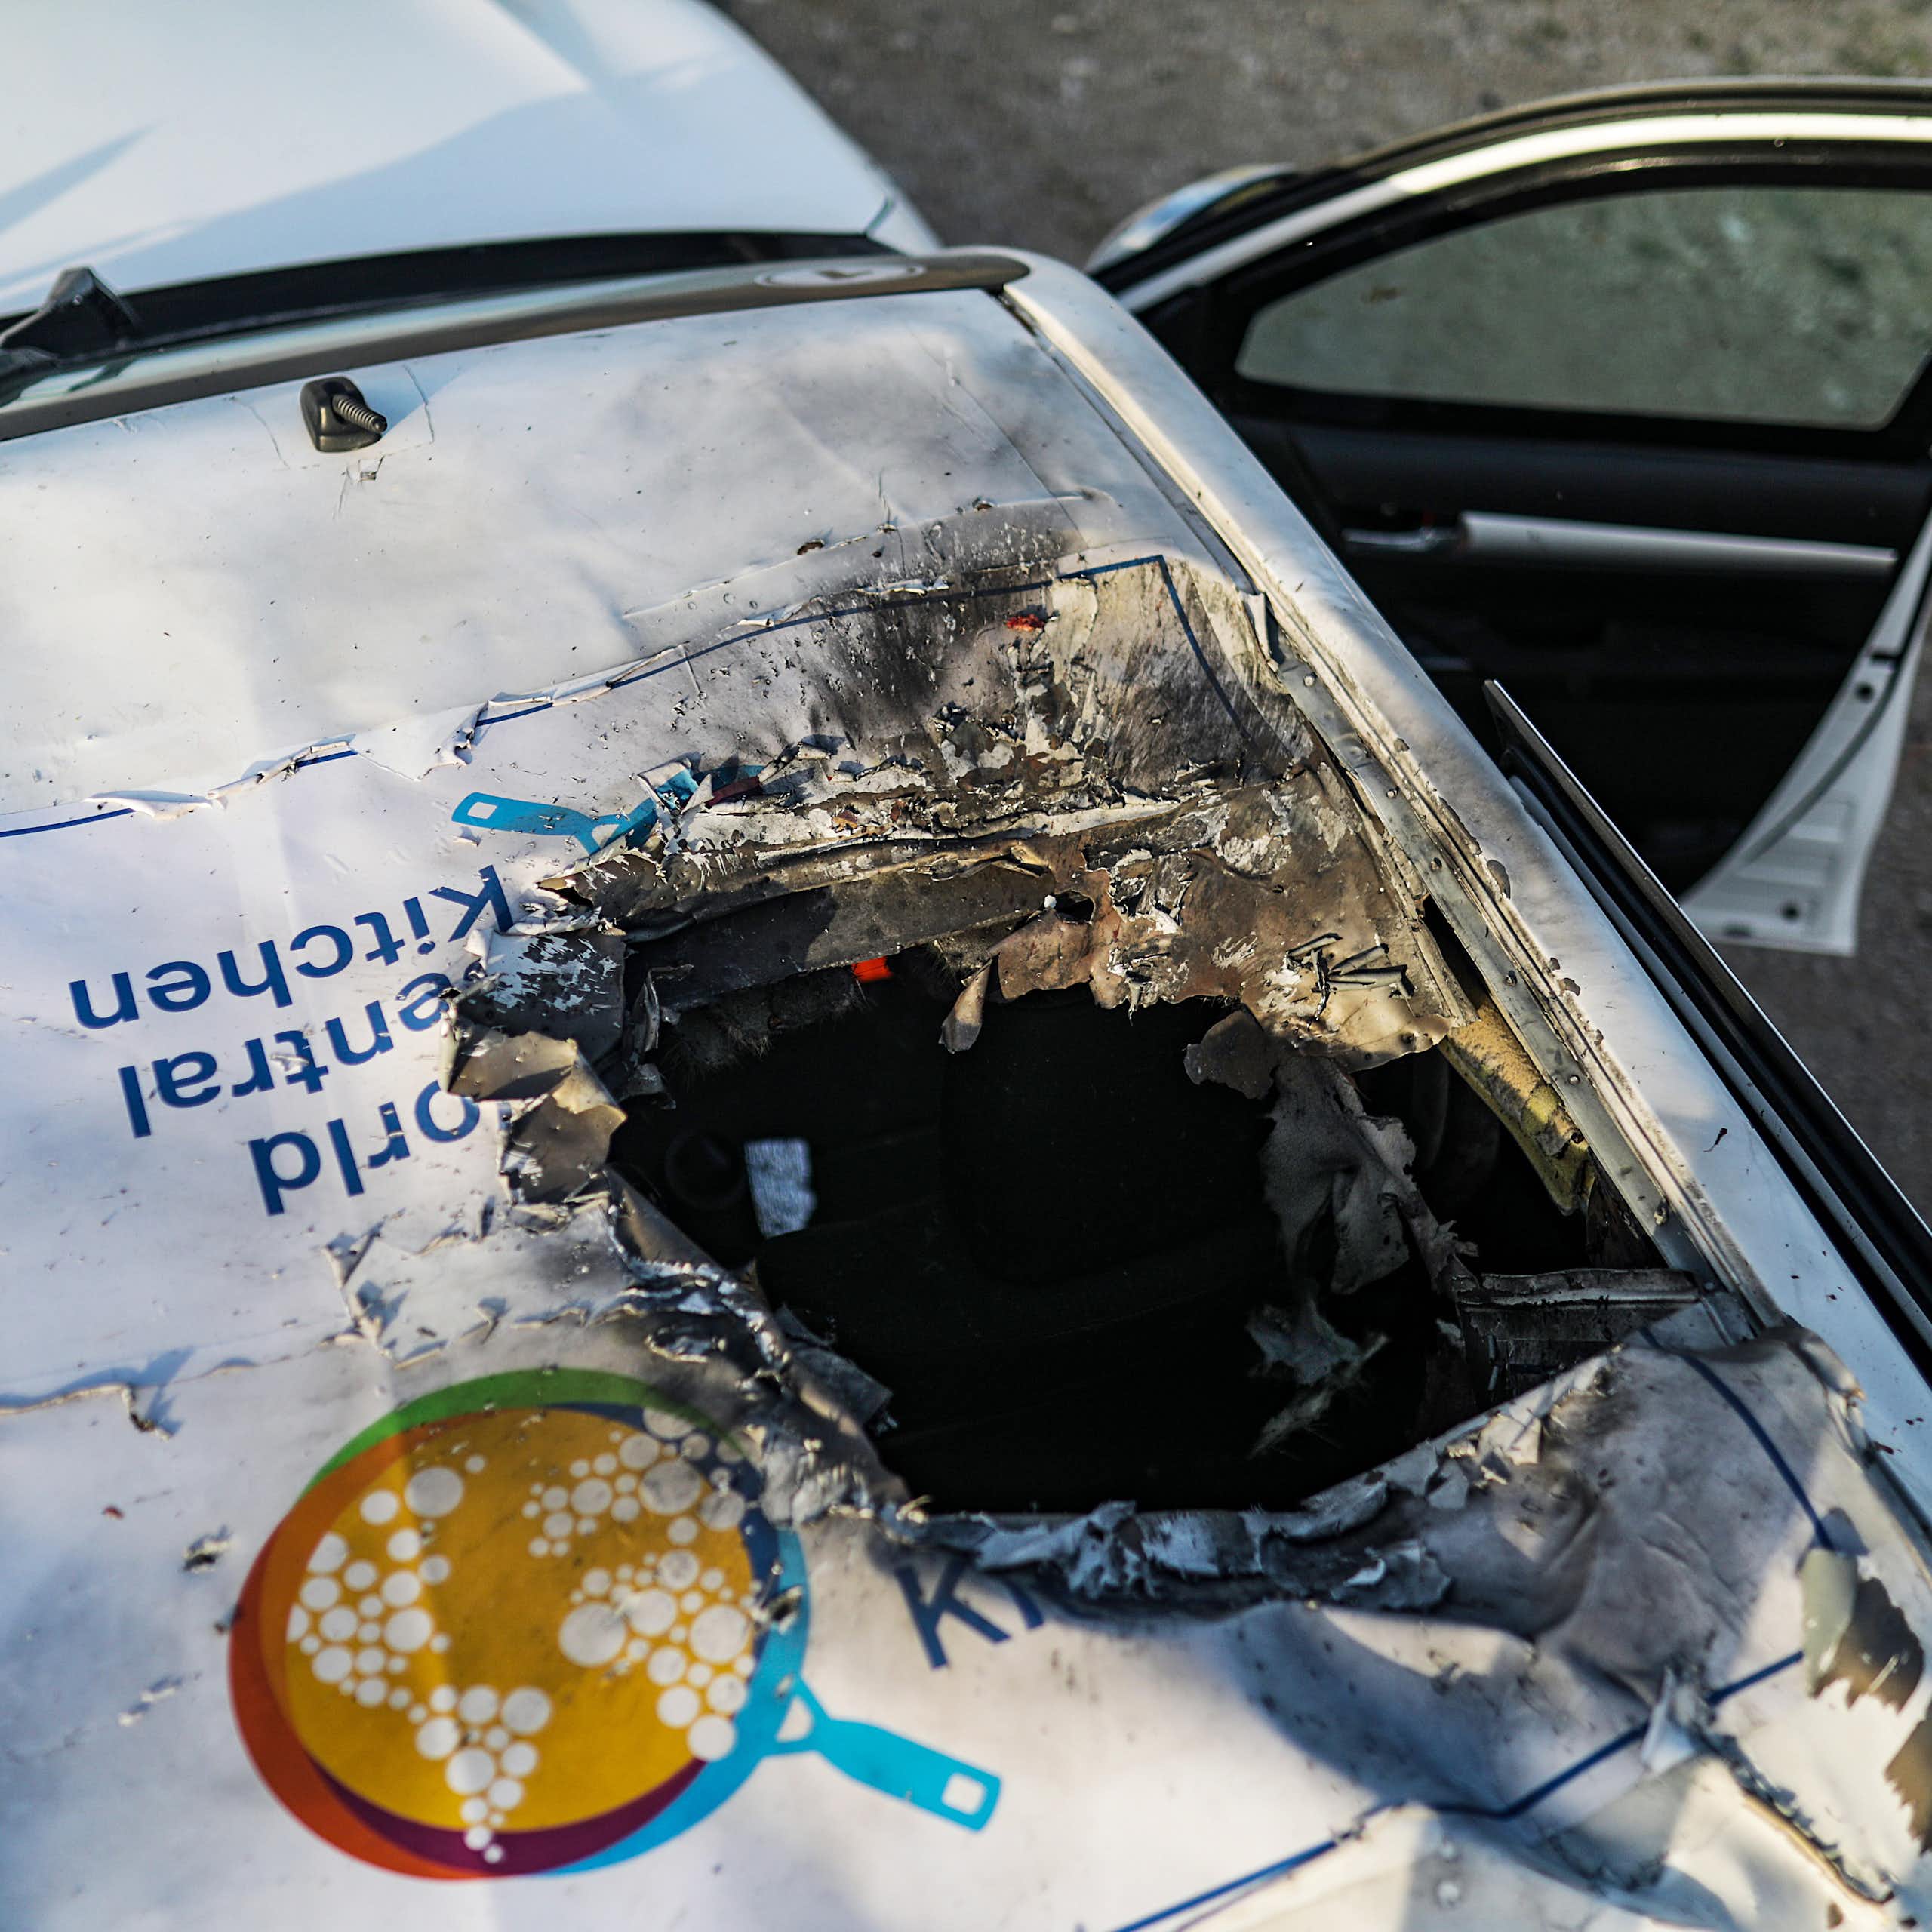 The damaged vehicle in which World Central Kitchen workers were travelling when hit by an Israeli airstrike.